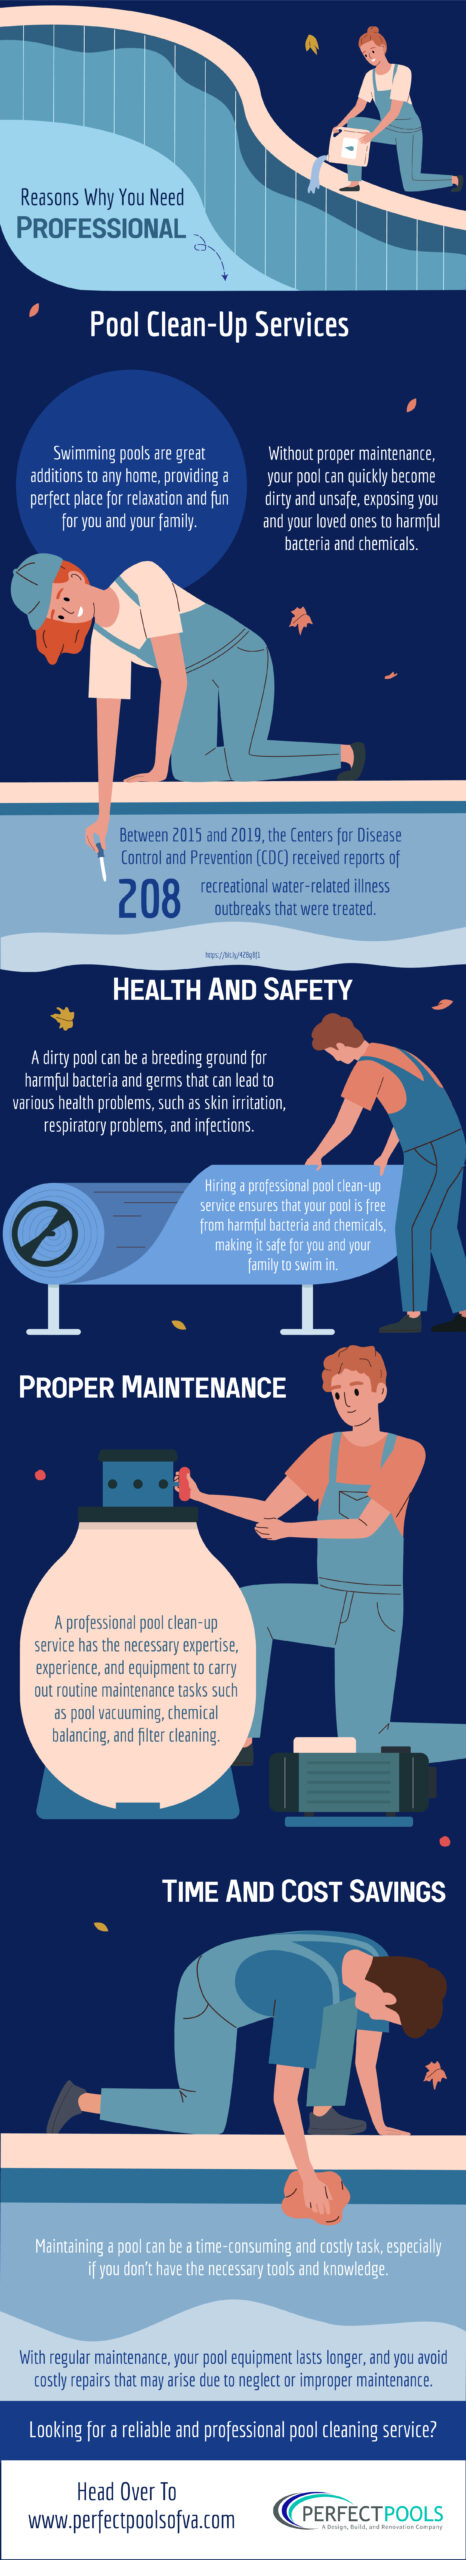 Reasons Why You Need Pool Clean-up Services - Infograph